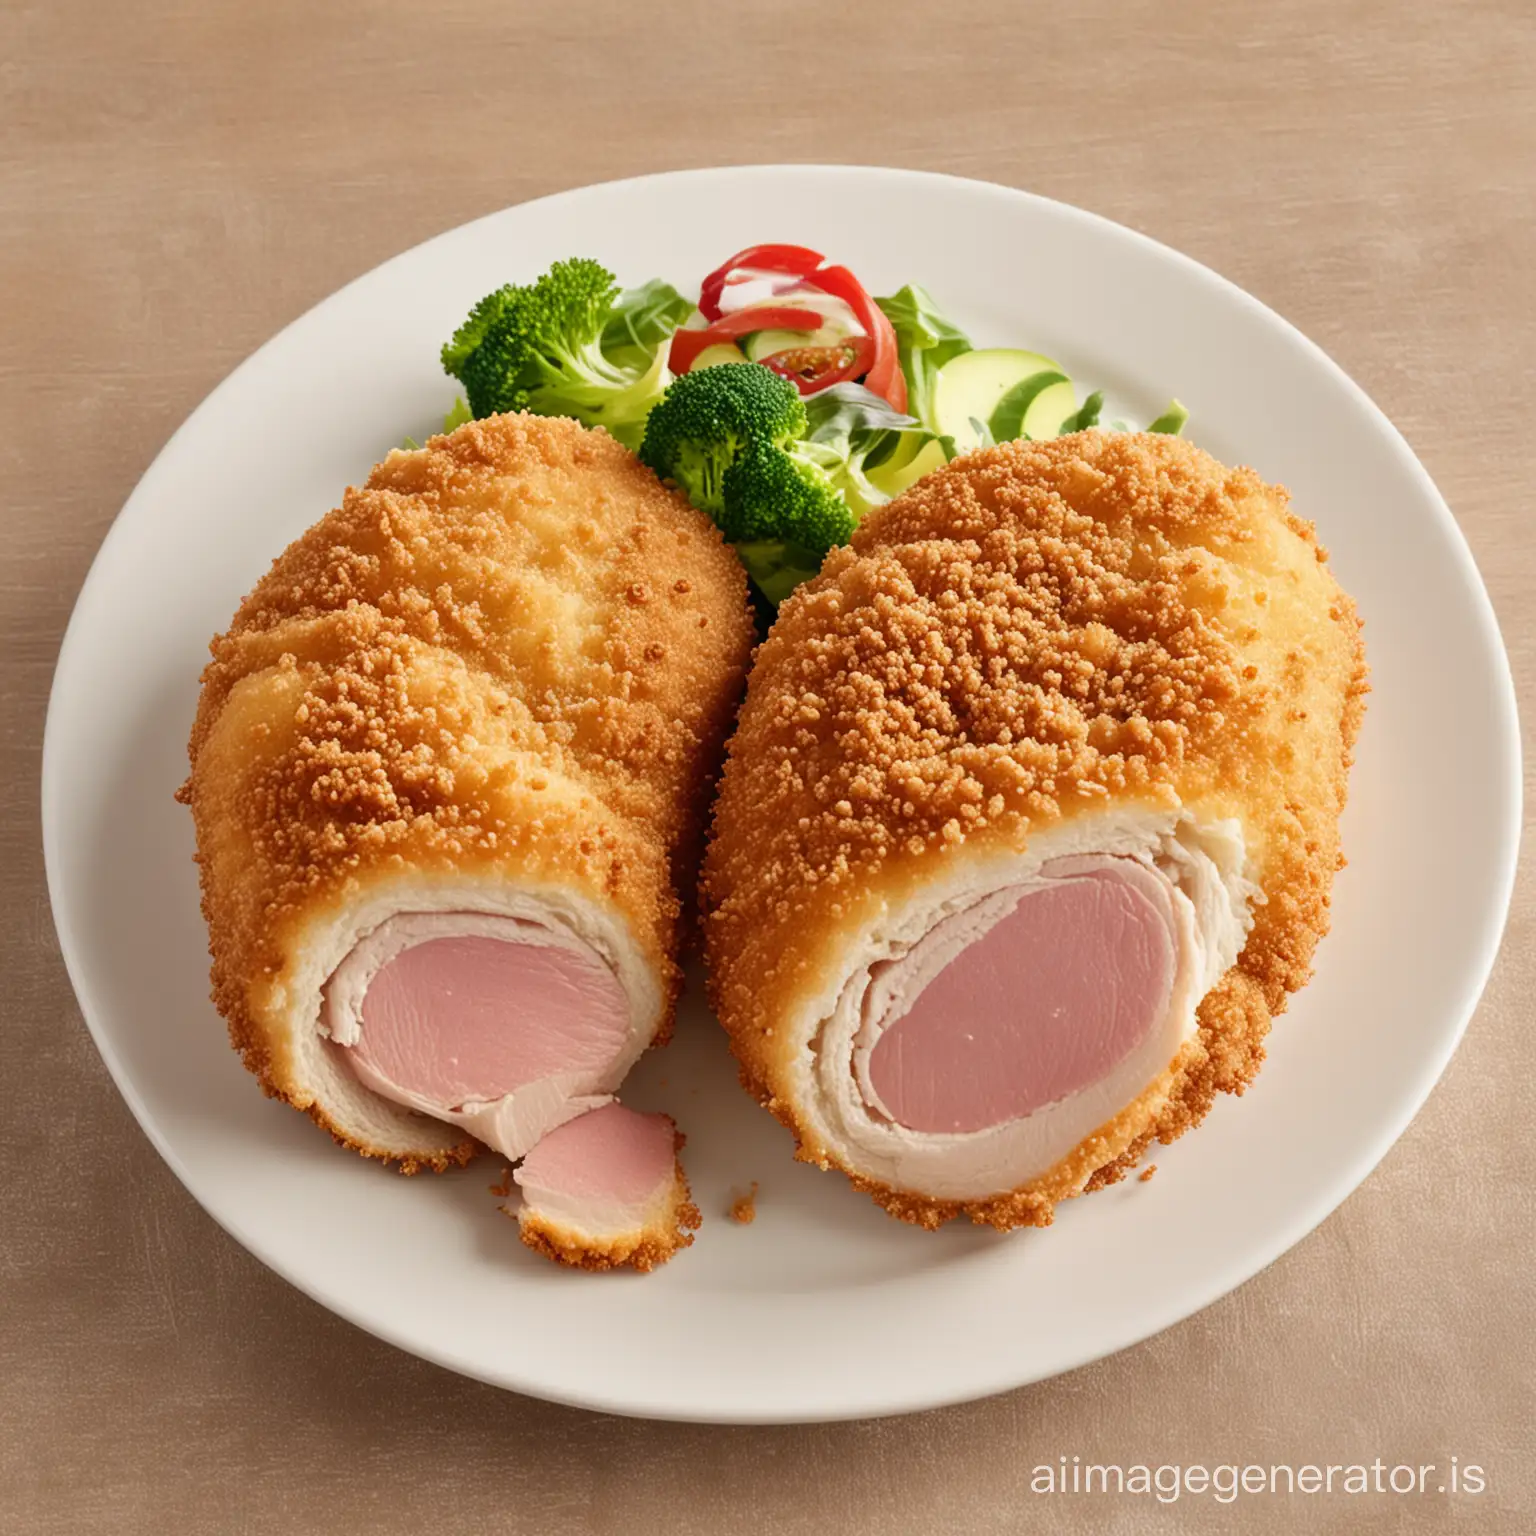 Delicious-Breaded-Cordon-Bleu-Dish-with-Crispy-Exterior-and-Juicy-Filling